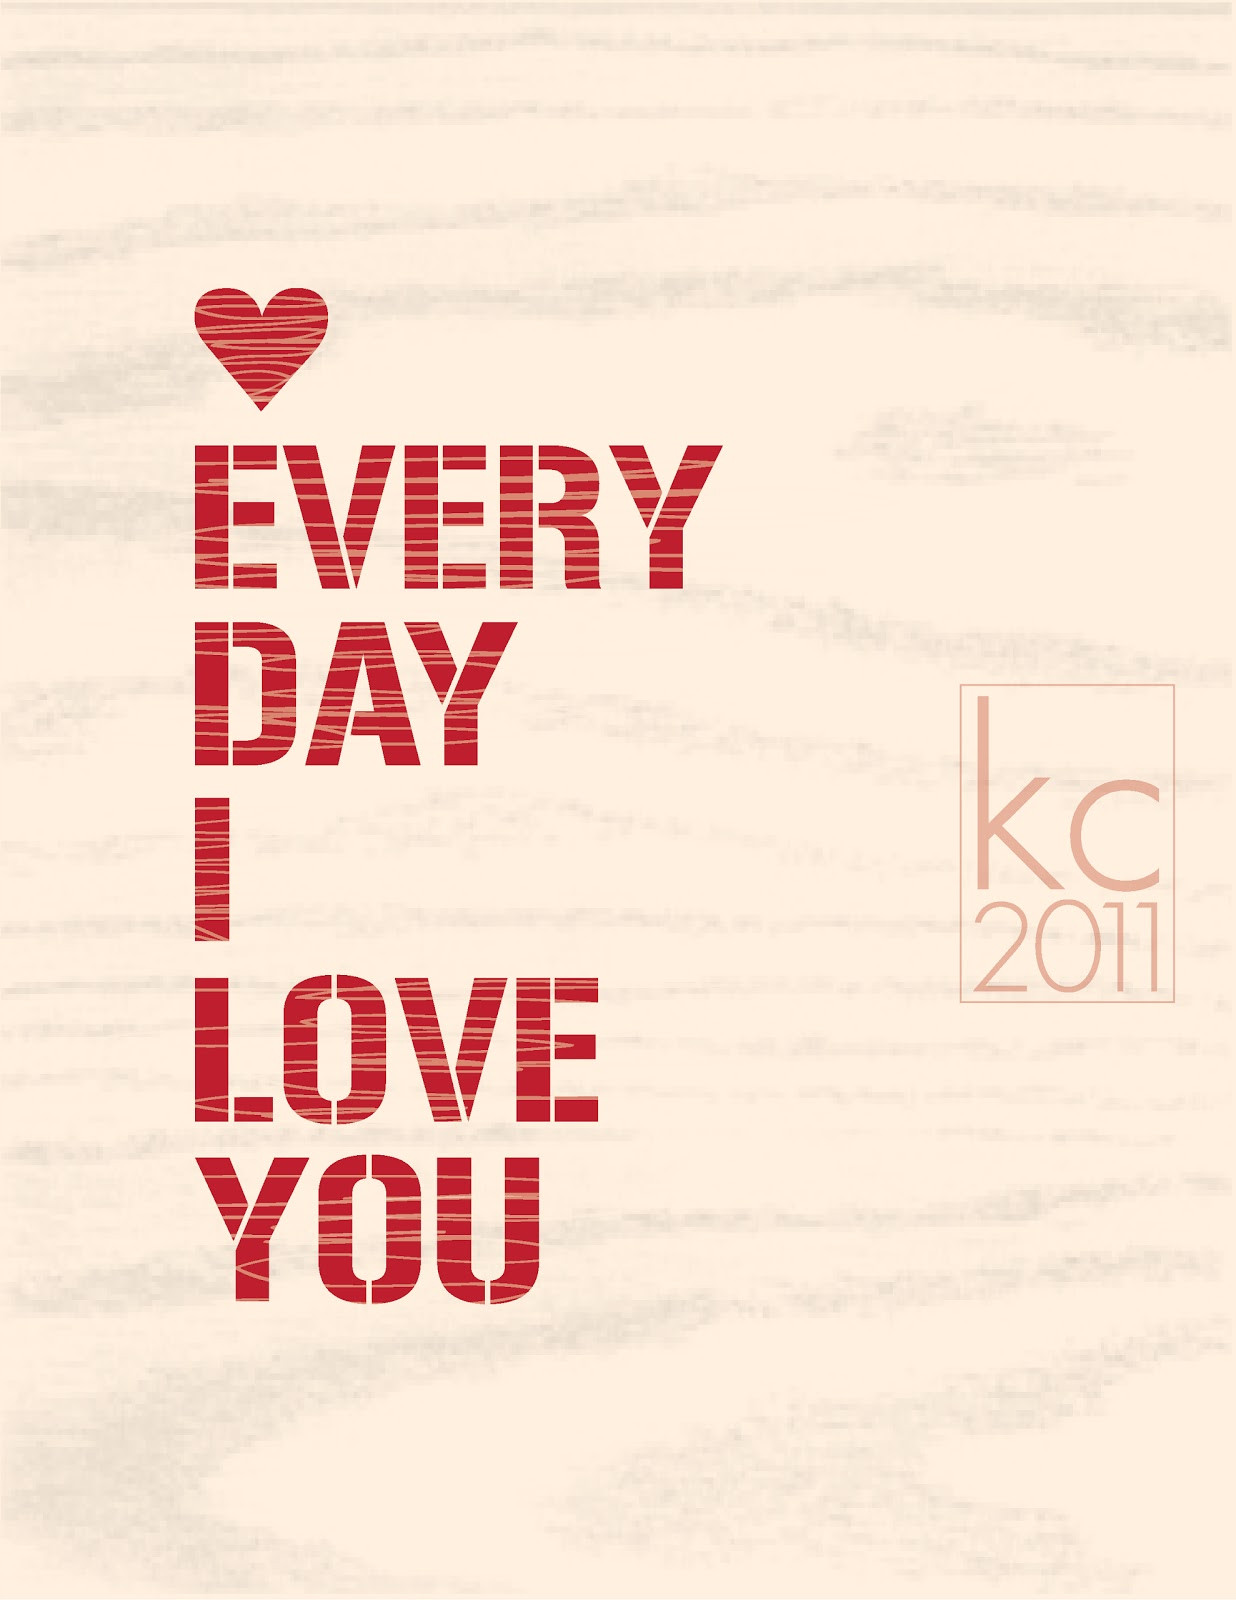 I Love You More Everyday Quotes
 I Love You More Everyday Quotes QuotesGram